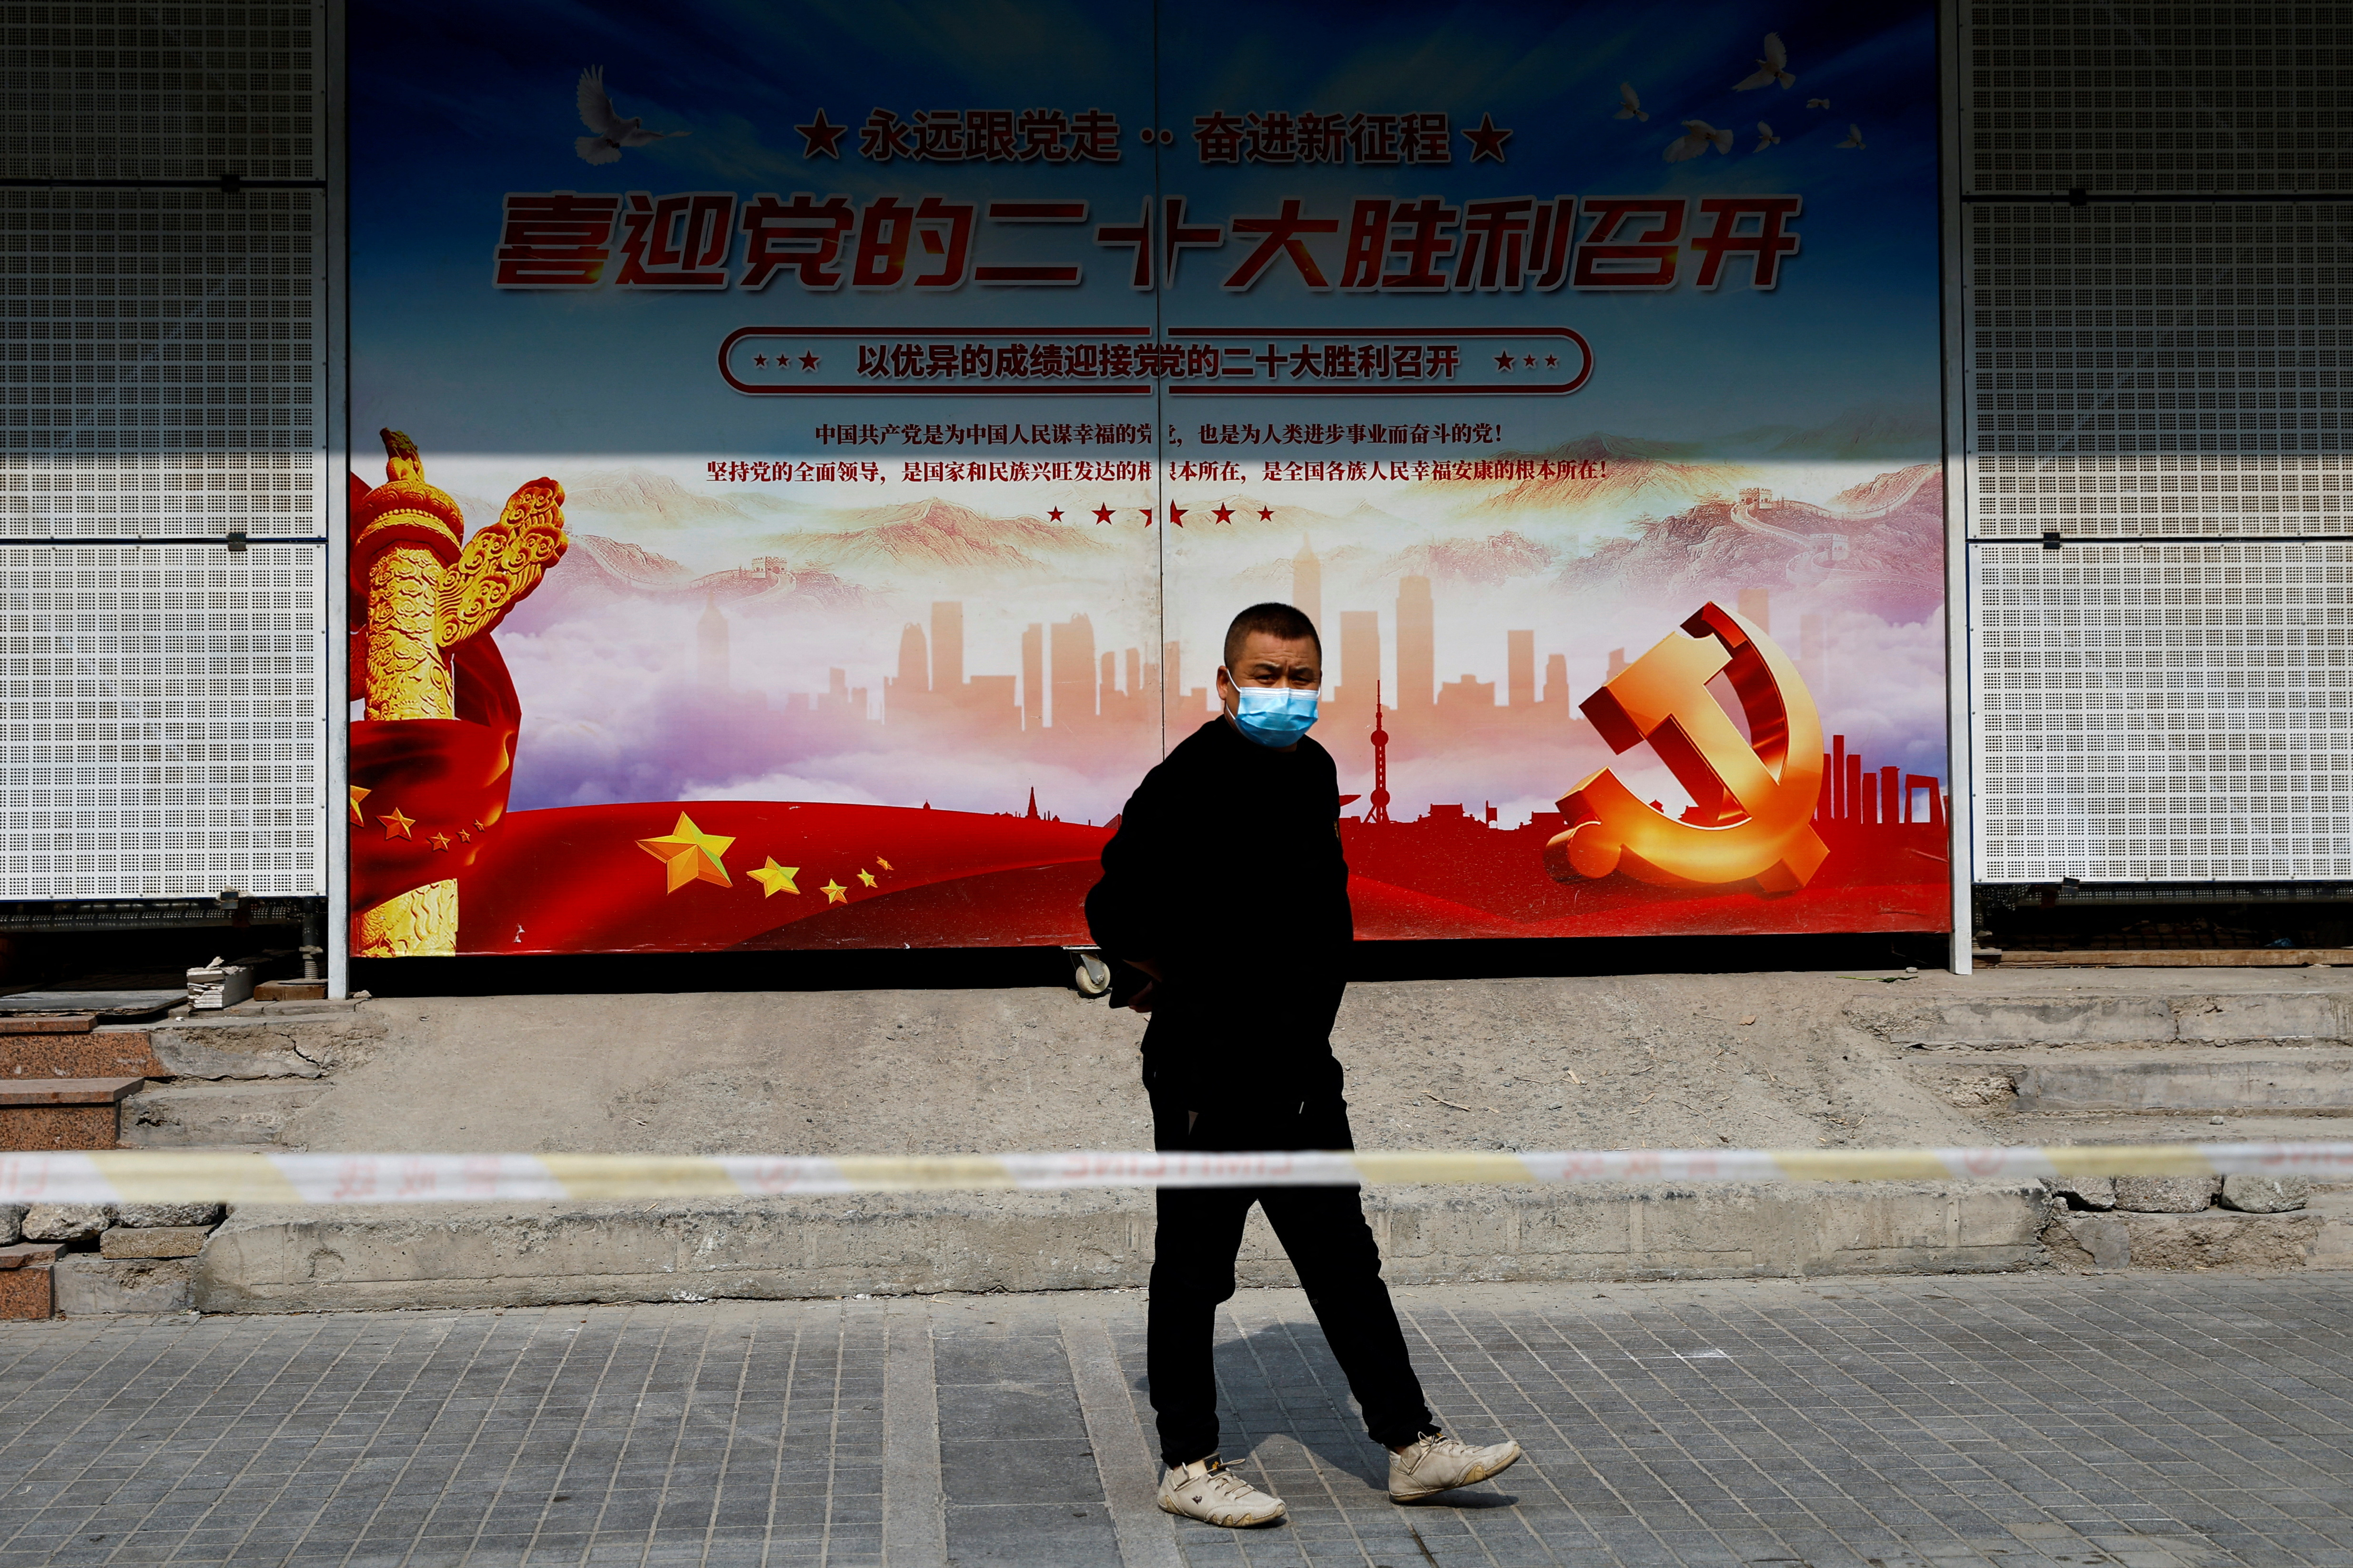 Man walks past a poster welcoming the 20th National Congress of the Communist Party of China, in Beijing